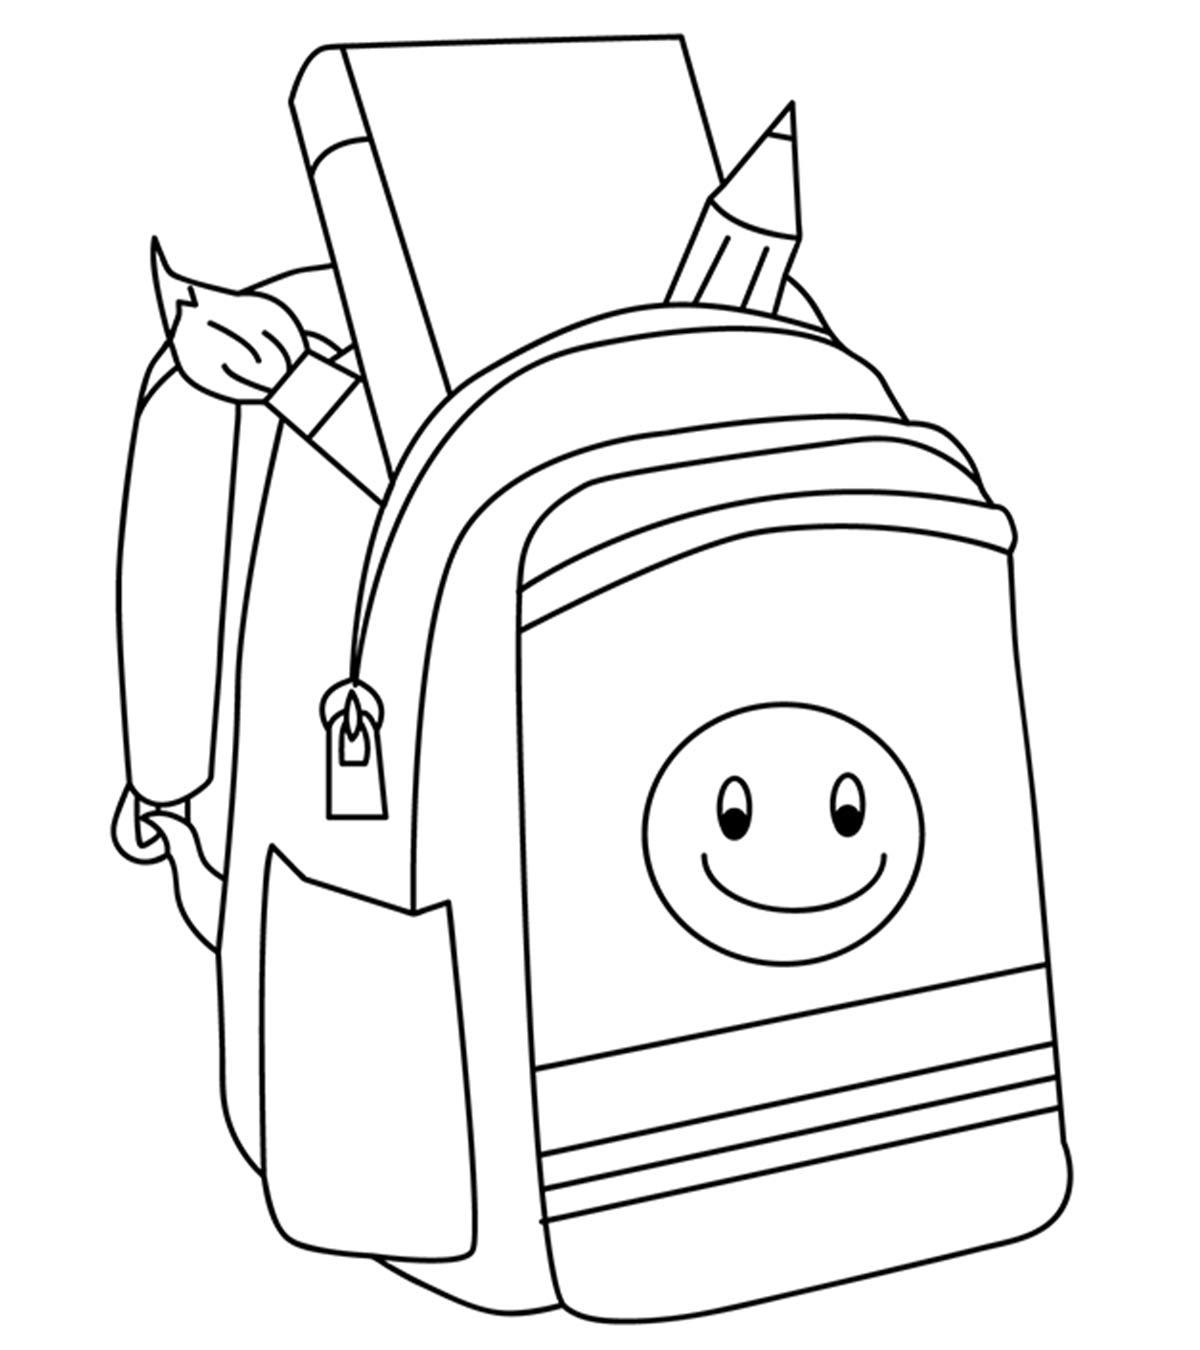 eductional-coloring-pages-momjunction